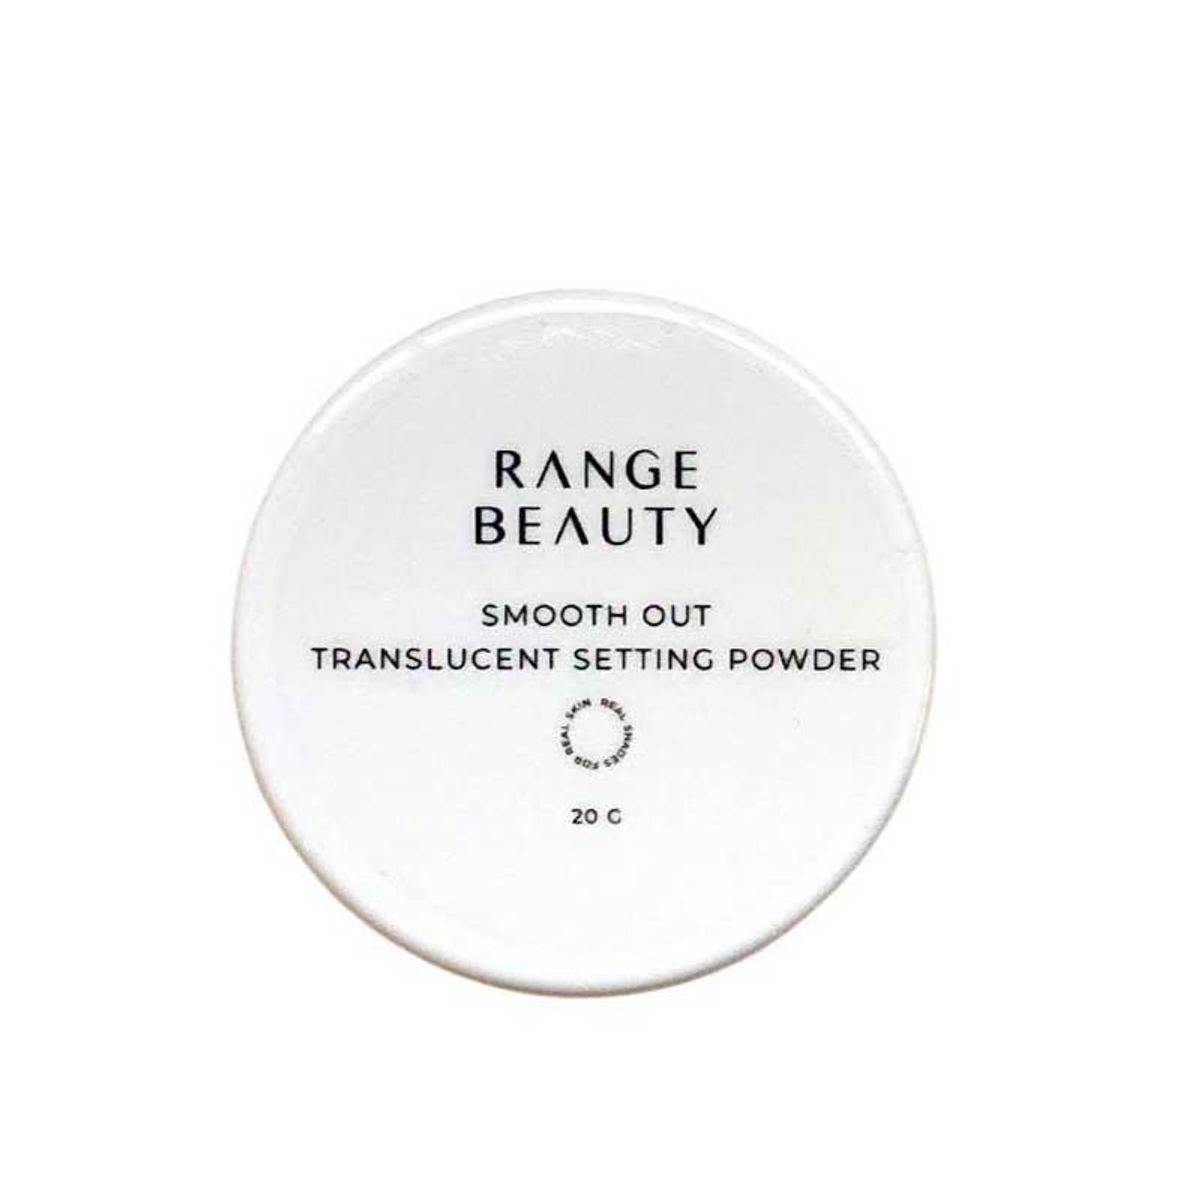 range beauty smooth out